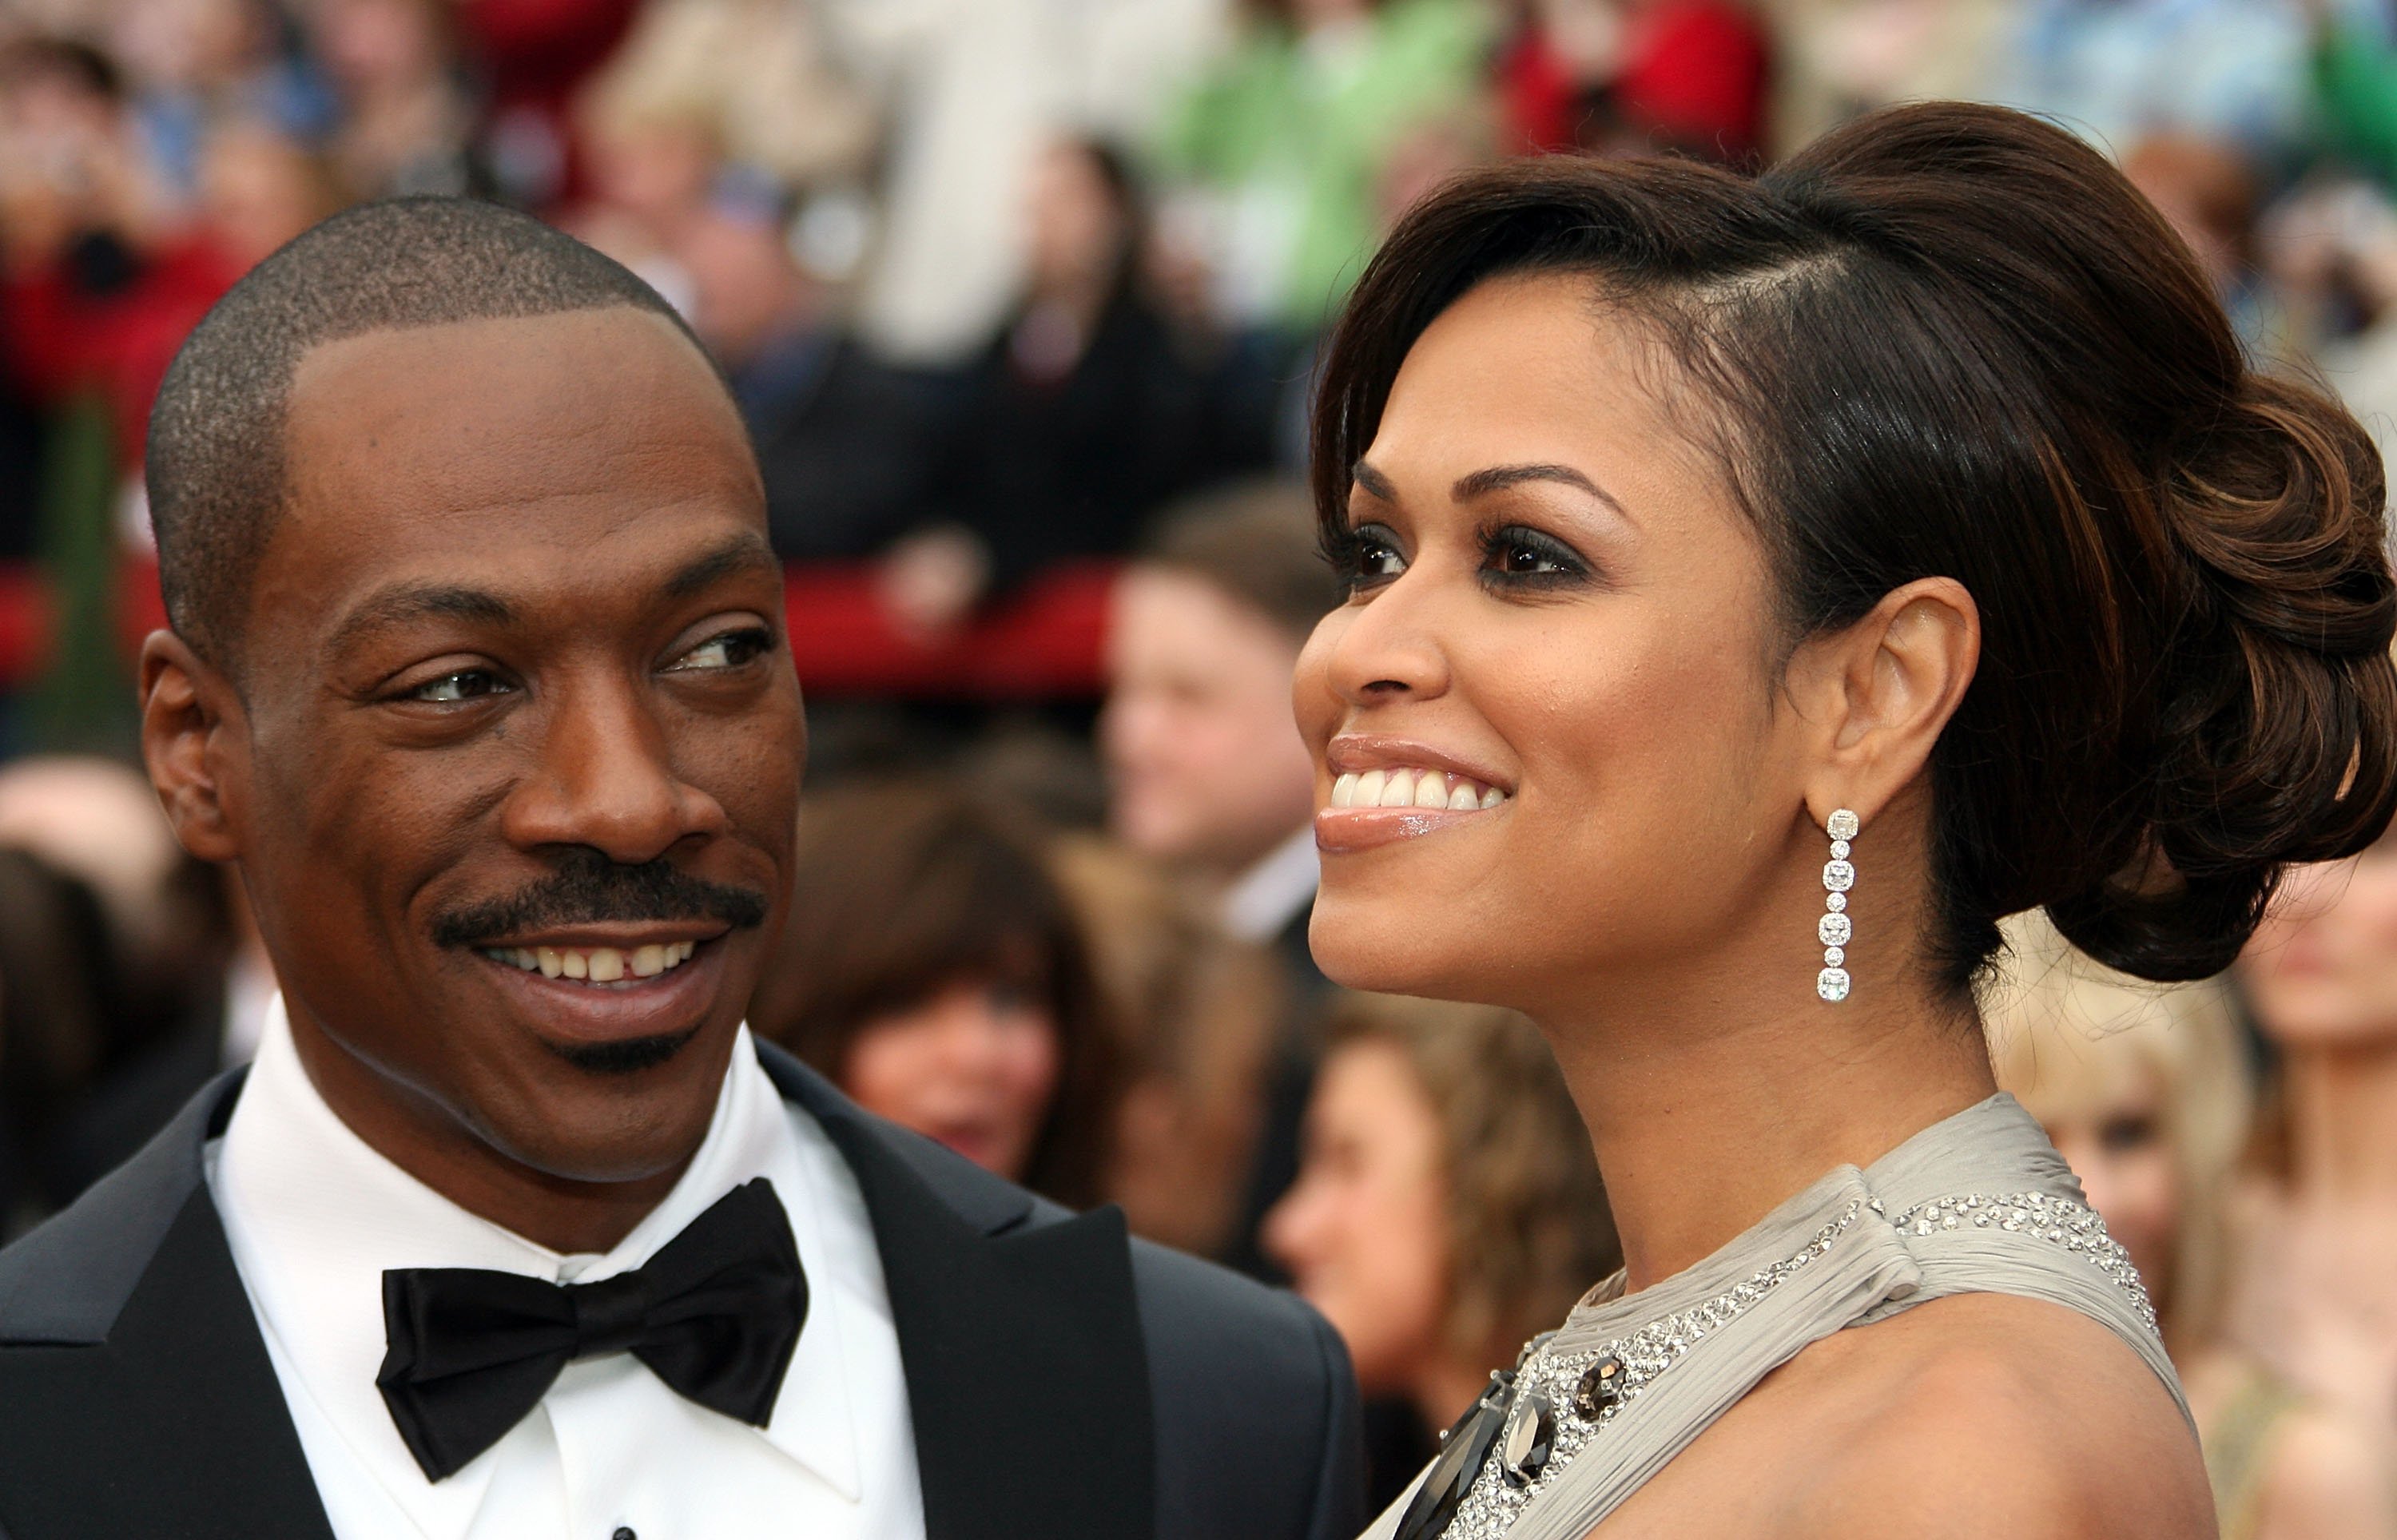 Actor Eddie Murphy and producer Tracey Edmonds attend the 79th Annual Academy Awards held at the Kodak Theatre on February 25, 2007 in Hollywood, California | Source: Getty Images